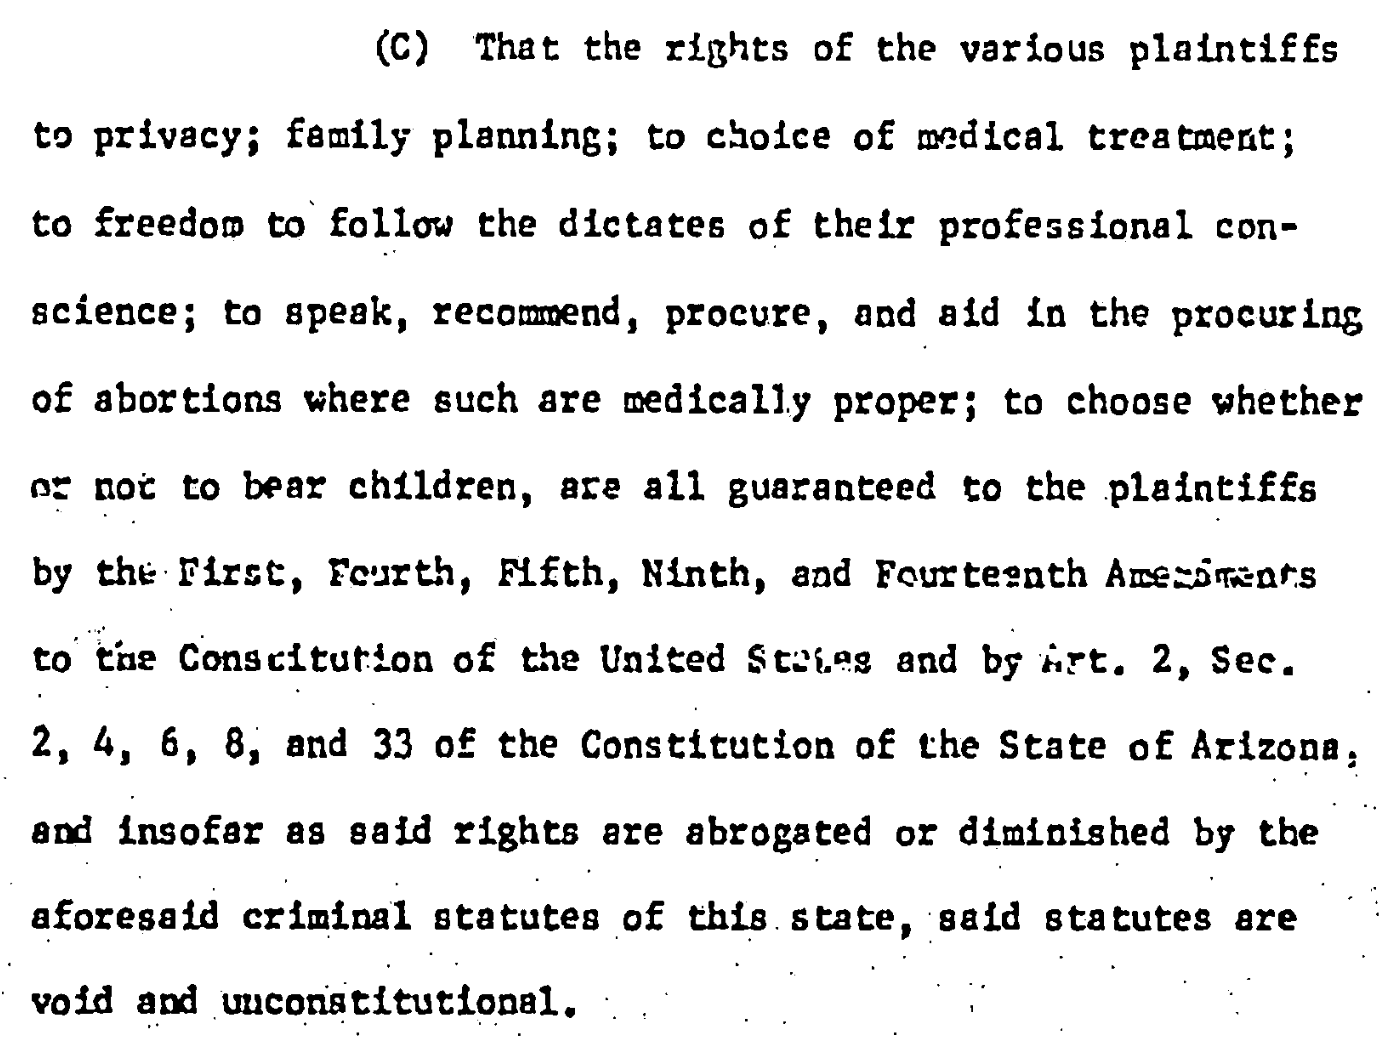 (C) That the rights of the various plaintiffs to privacy; family planning; to choice of medical treatment; to freedom to follow the dictates of their professional con- science; to speak, recomend, procure, and aid in the procuring of abortions where such are medically proper; to choose whether oe not to bear children, ase all guaranteed to the plaintiffs by the First, Fourth, Elfth, Ninth, and Fourtesnth Anezimats to the Conscitution of the United States and by irt. 2, Sec. 2, 4, 6, 8, and 33 of the Constitution of the State of Arizona, and Insofar as gaid rights are abrogated of diminished by the aforesaid criminal statutes of this state, said stacutes are void and constitutional.